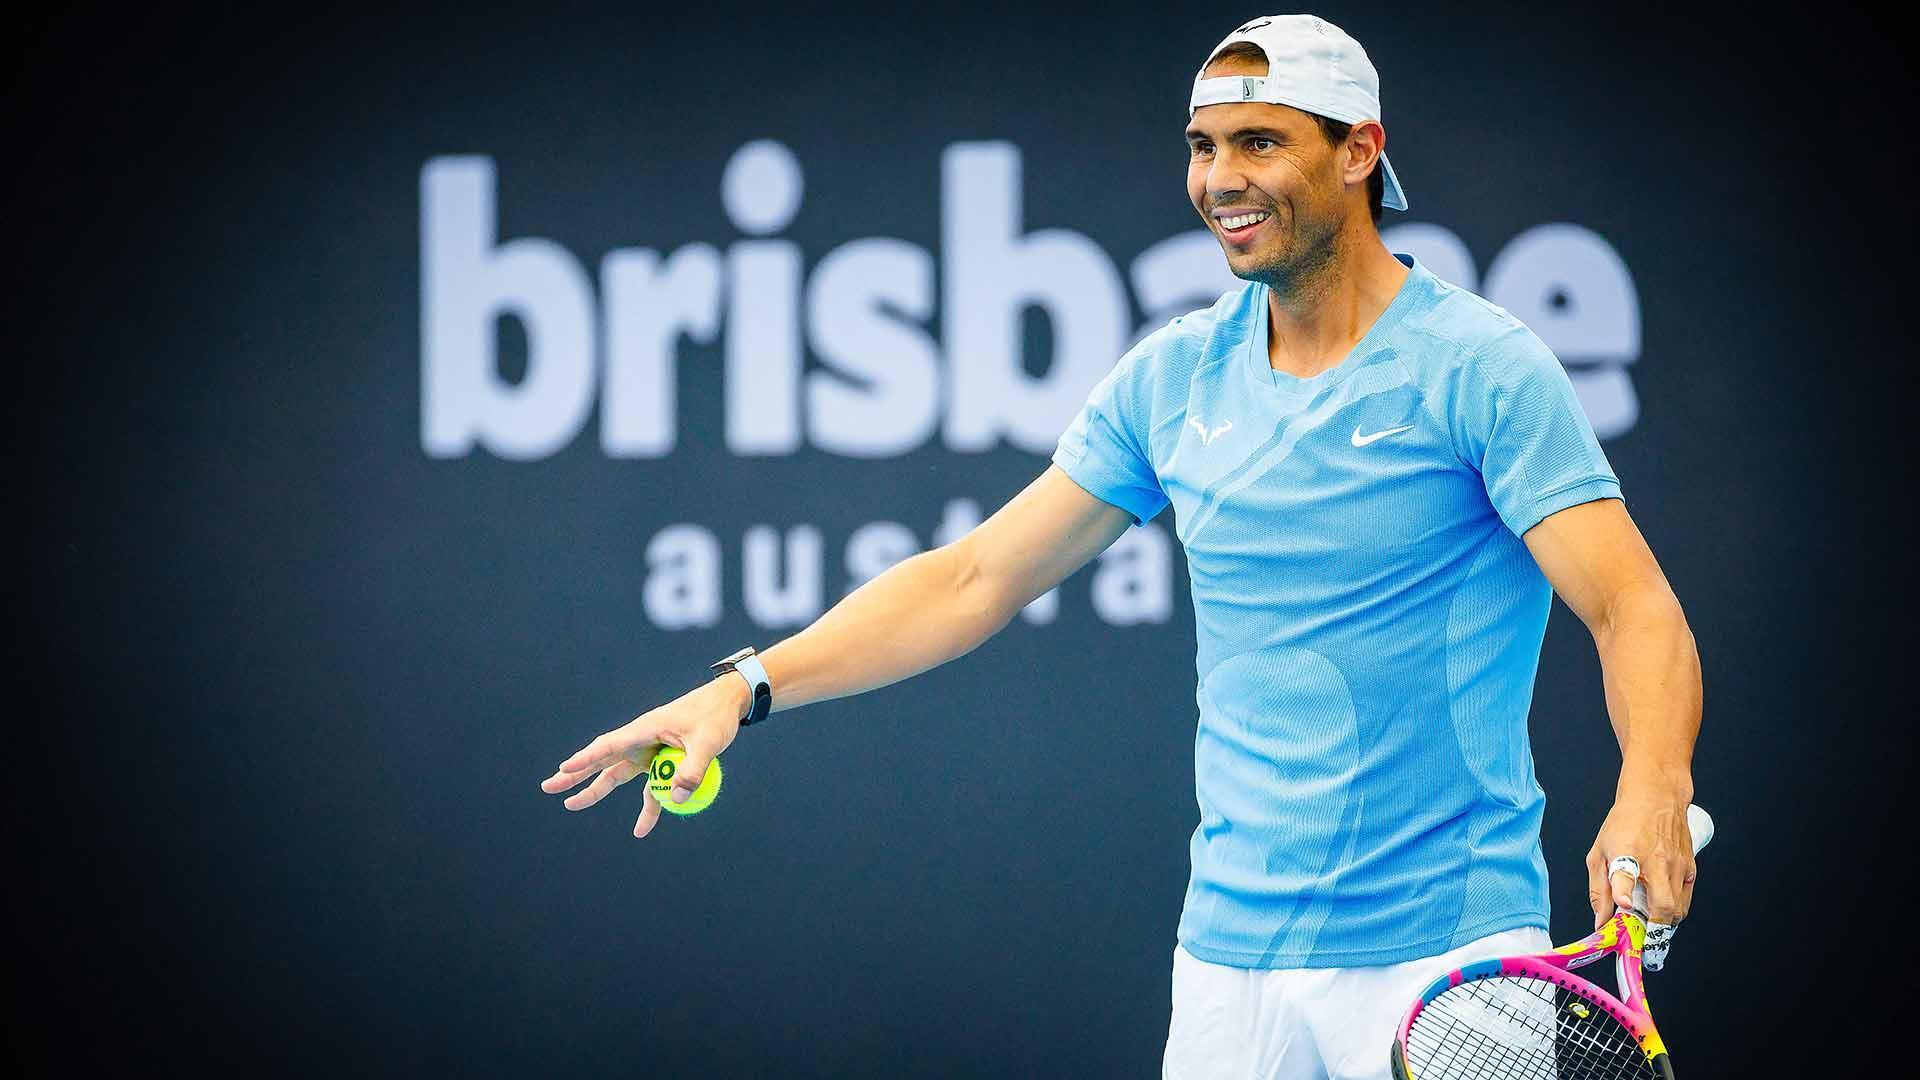 When will Rafael Nadal return to action? Details here